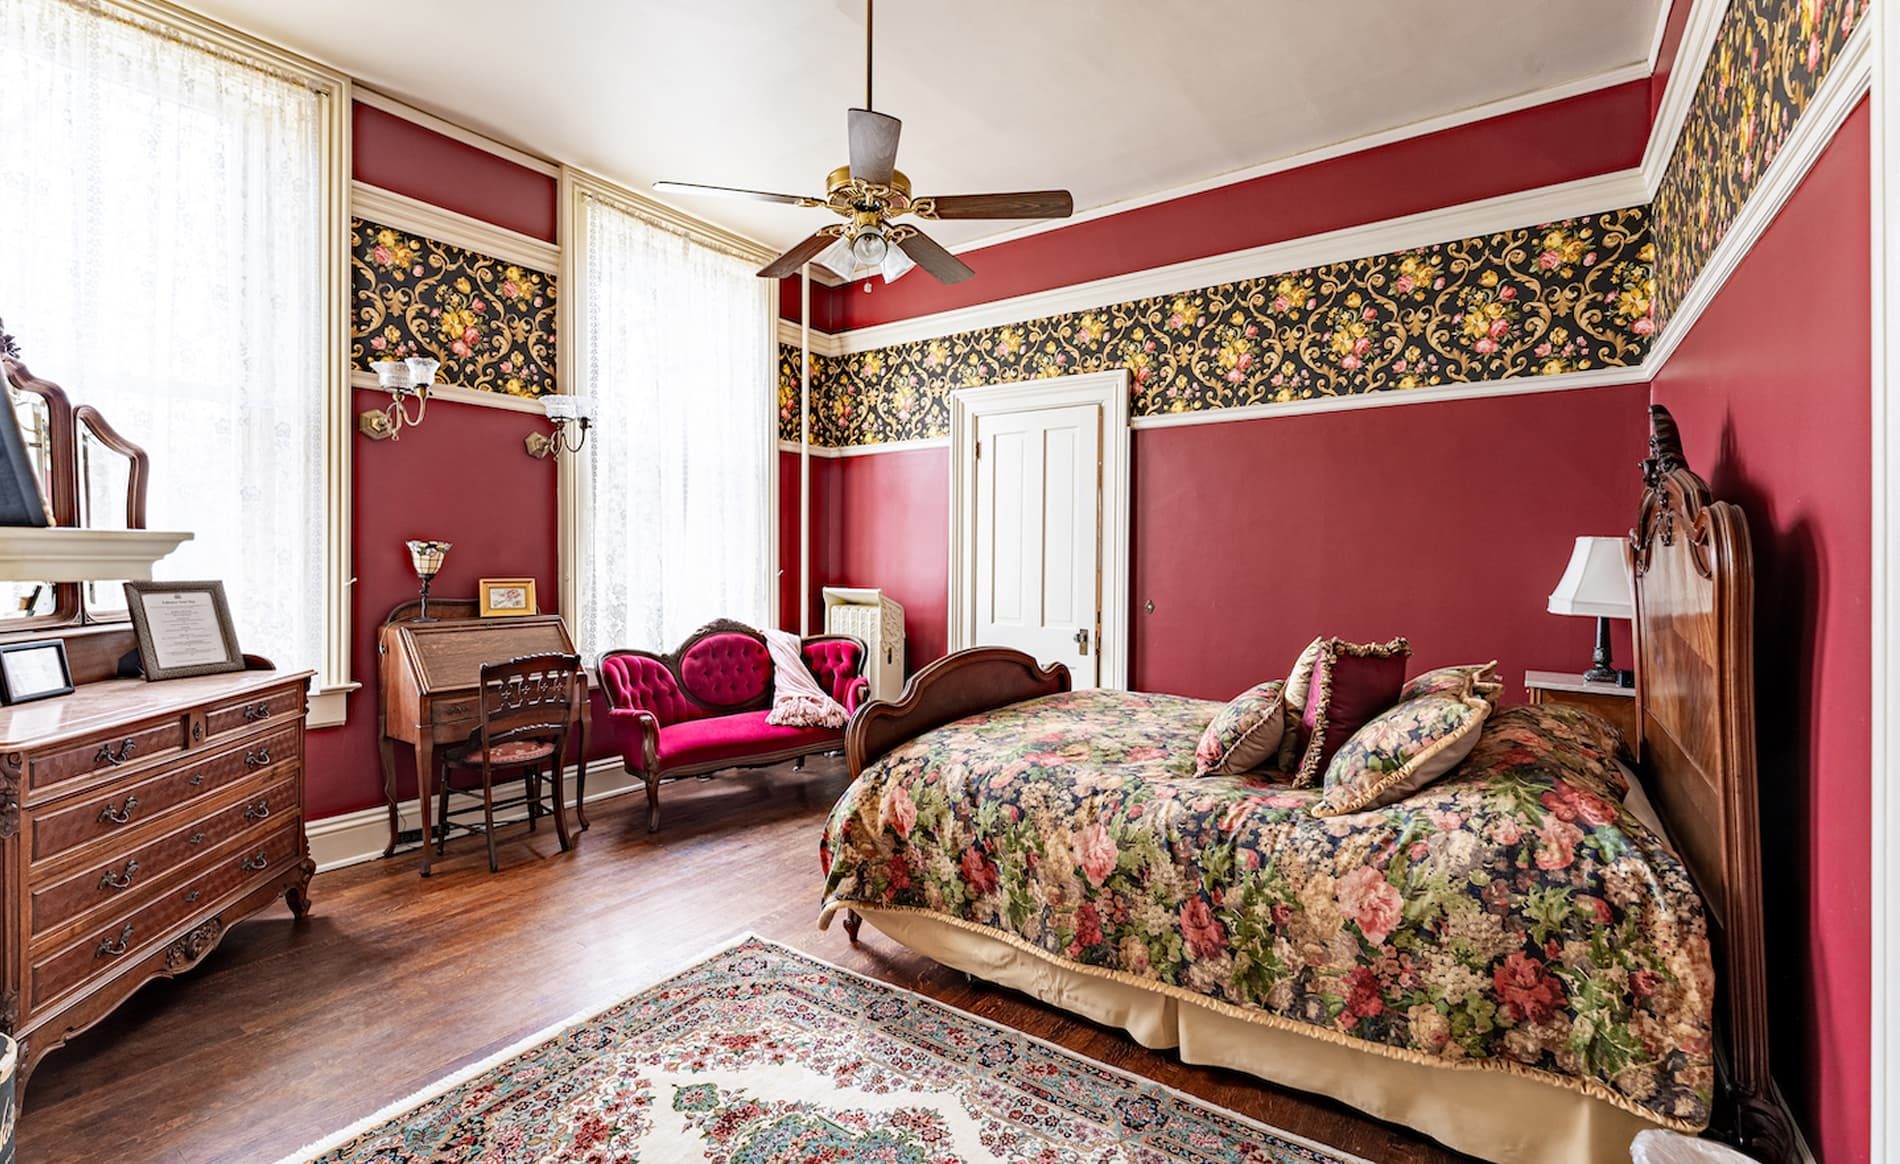 Rose Room with vibrant rose themed bedspread and wallpaper